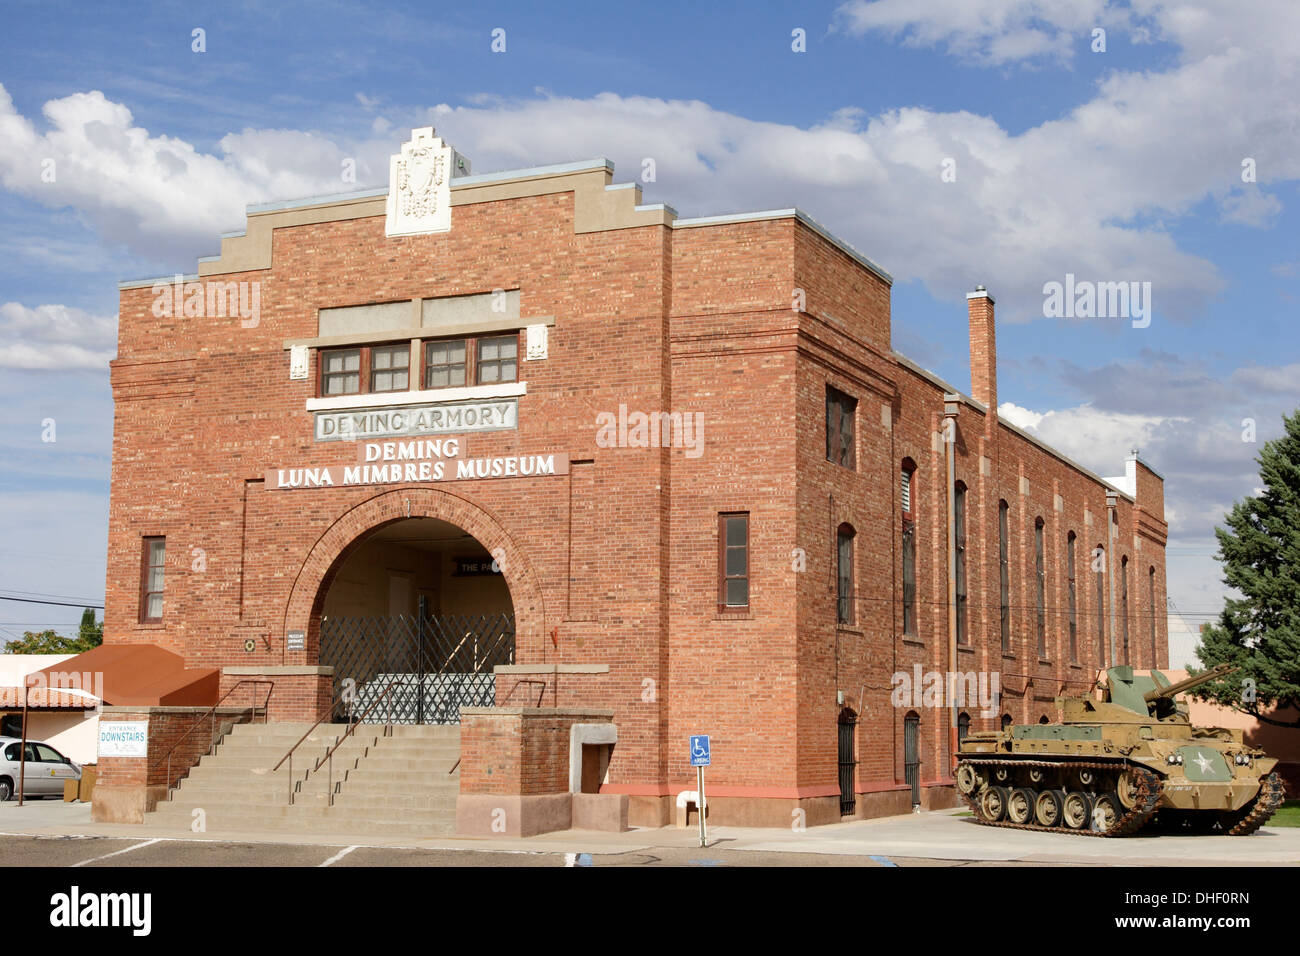 Deming Luna Mimbres Museum (built as armory in 1917), Deming, New Mexico USA Stock Photo